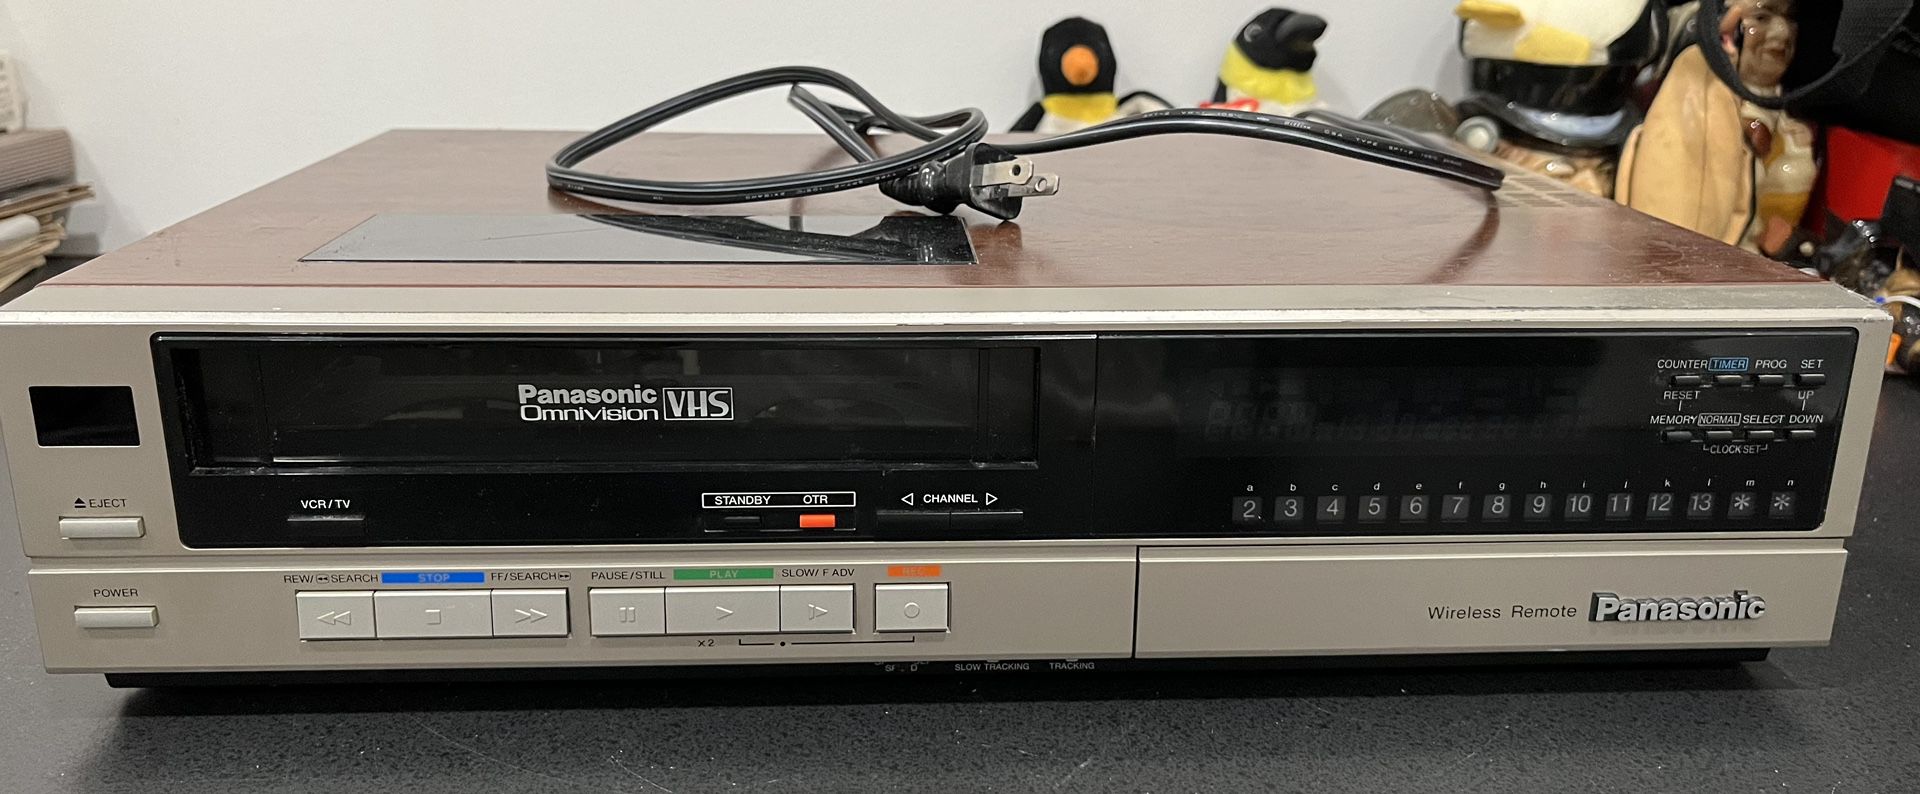 Panasonic VHS VCR Video Cassette Recorder PV-1334R Omnivision Not Working Tape